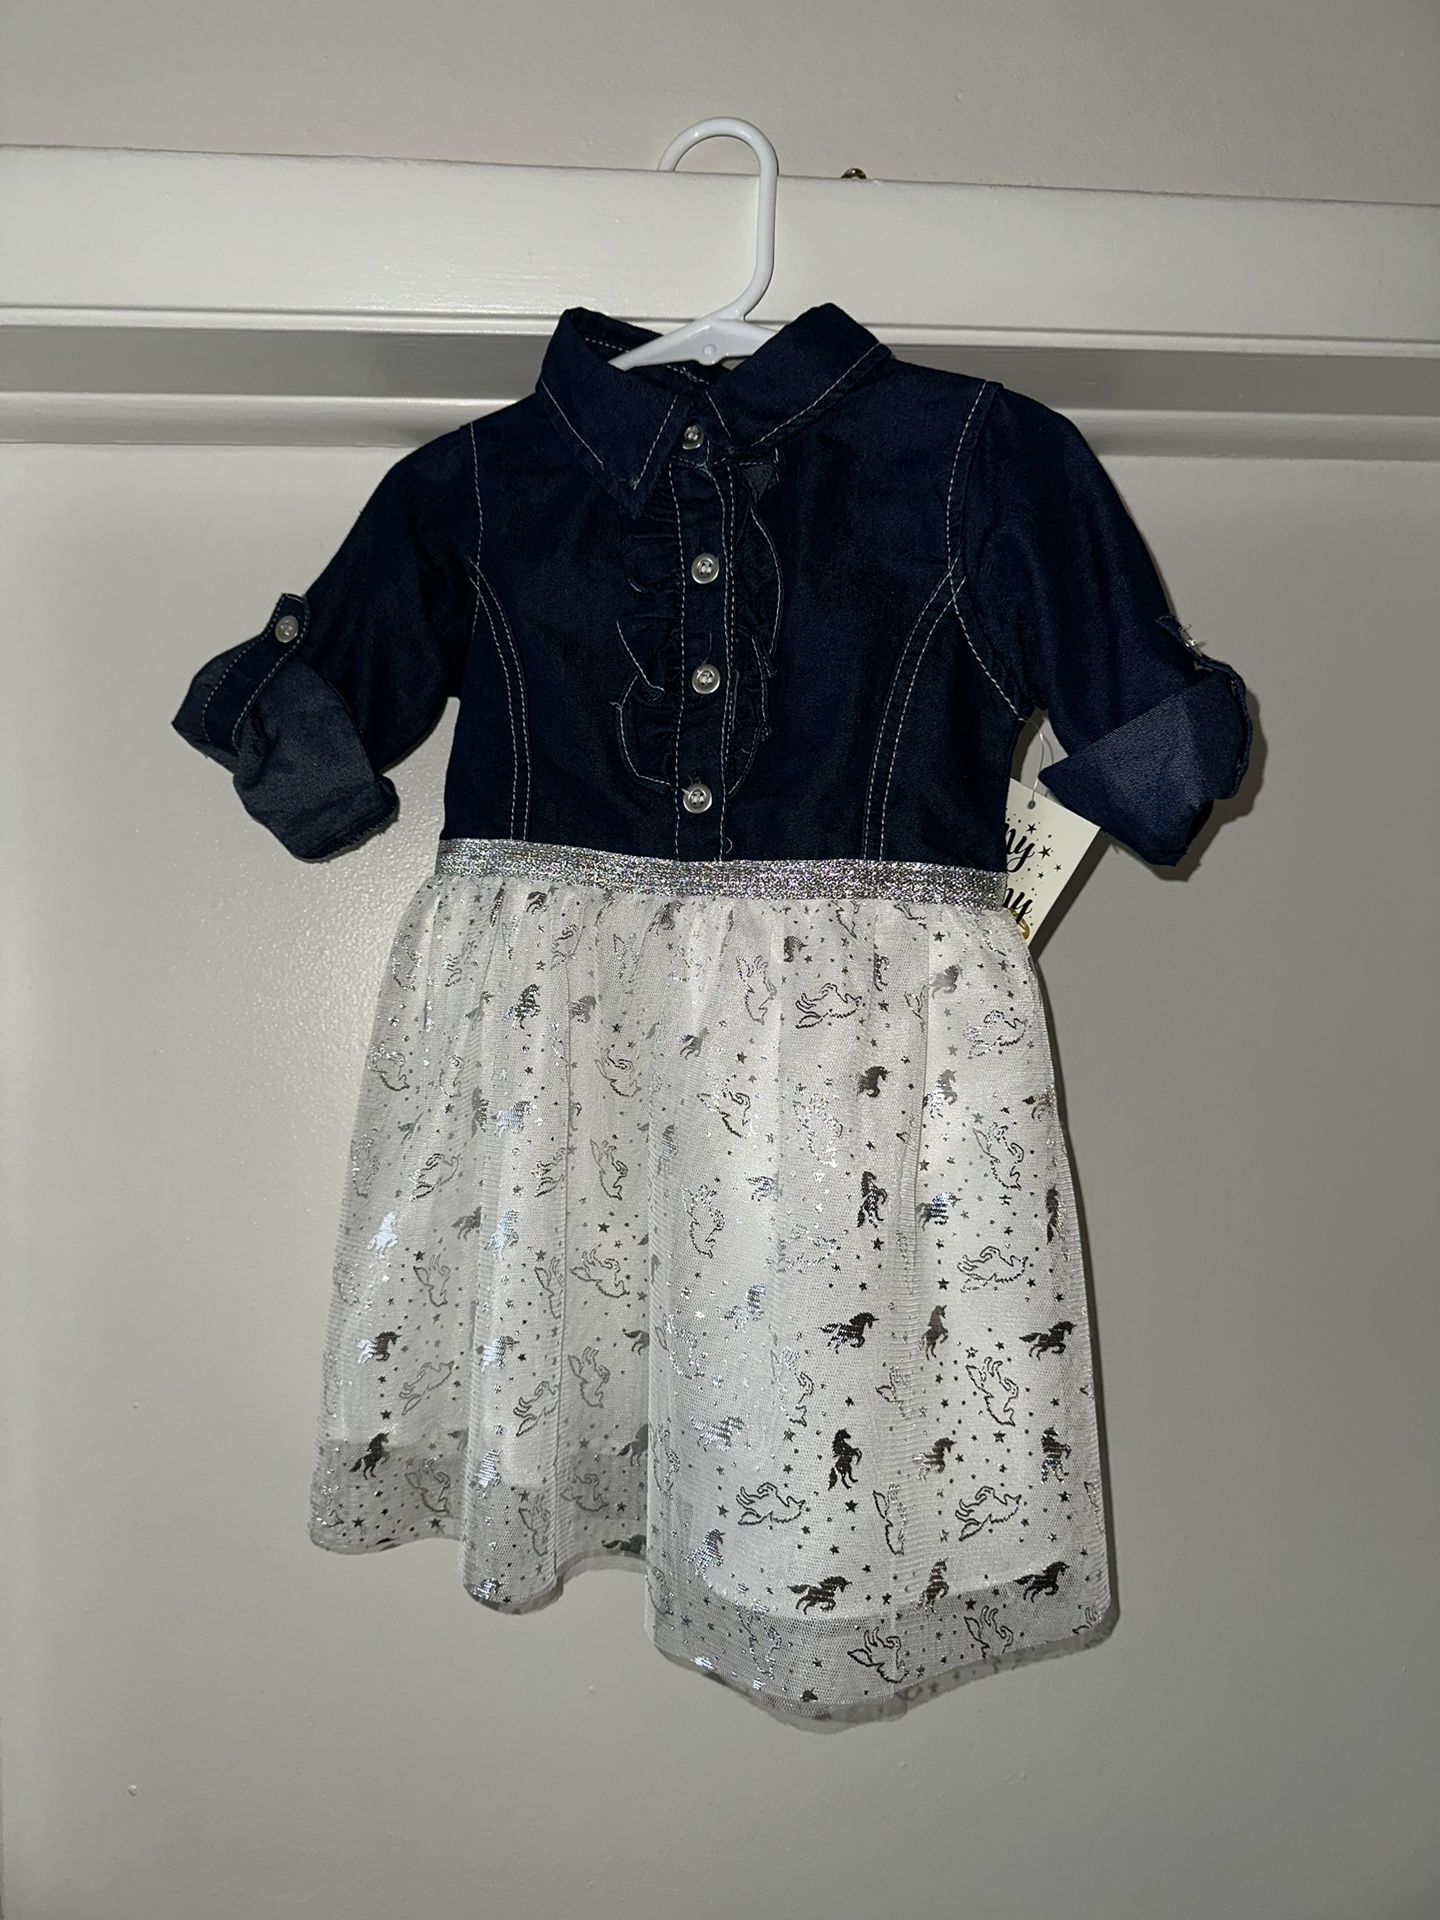 Jean Top Dress With Unicorn Tulle Bottom - 2T